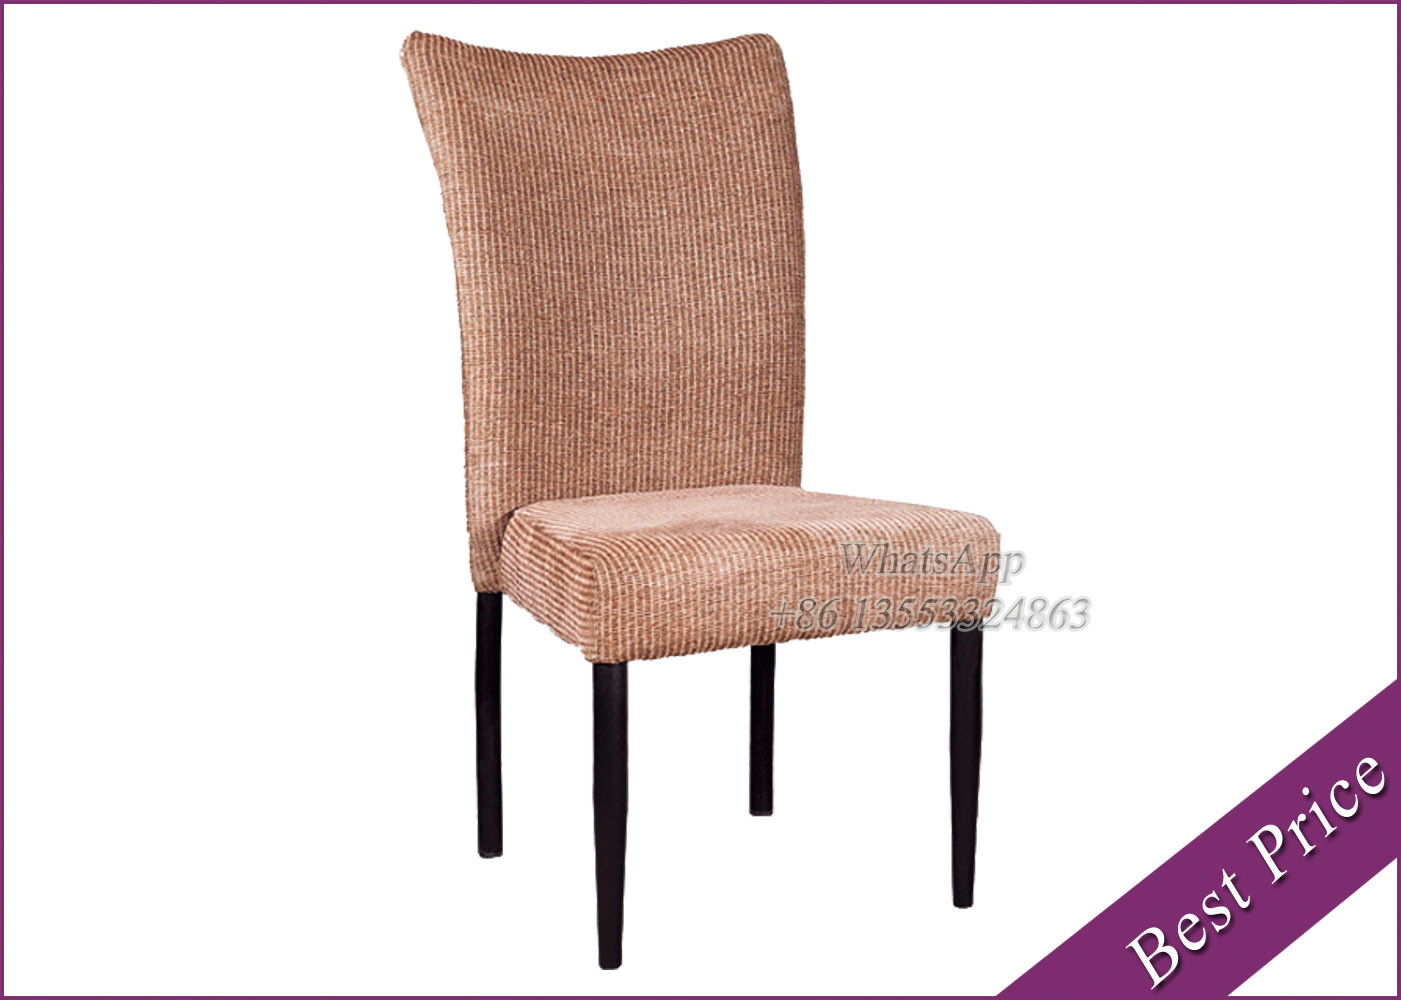 Modern Metal Dining Chairs For Sale With Wholesale Price (YA-31)